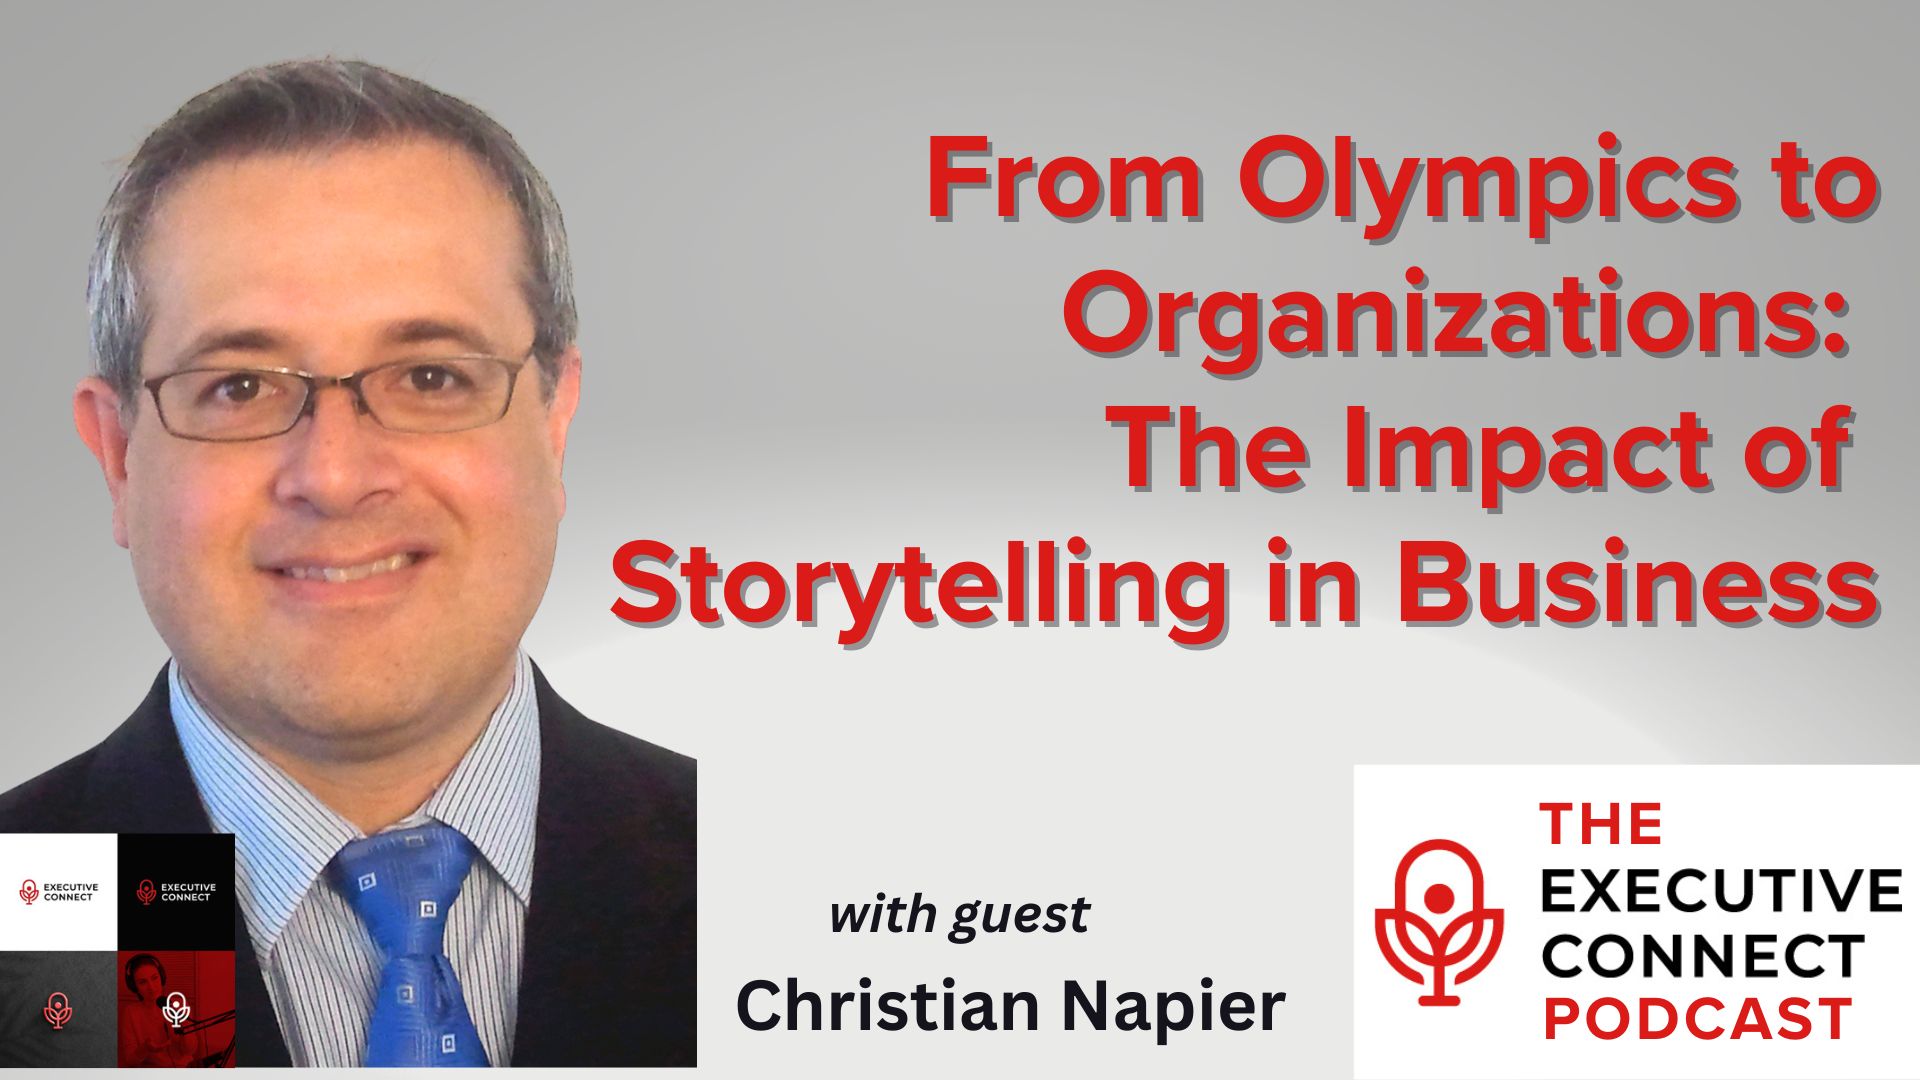 Podcast – From Olympics to Organizations: The Impact of Storytelling in Business